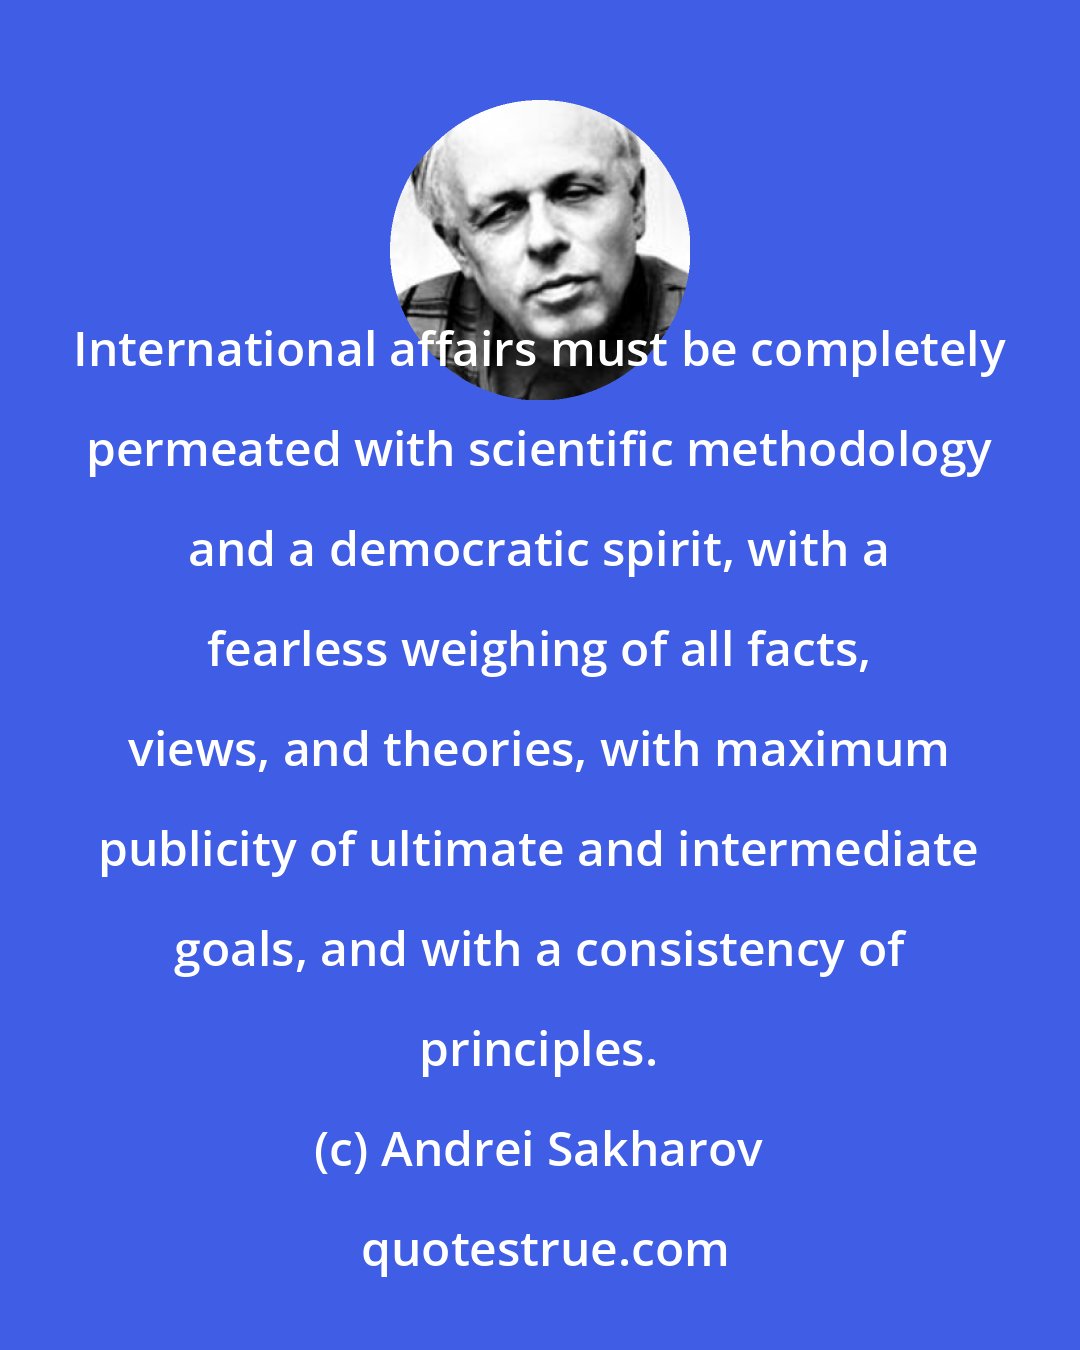 Andrei Sakharov: International affairs must be completely permeated with scientific methodology and a democratic spirit, with a fearless weighing of all facts, views, and theories, with maximum publicity of ultimate and intermediate goals, and with a consistency of principles.